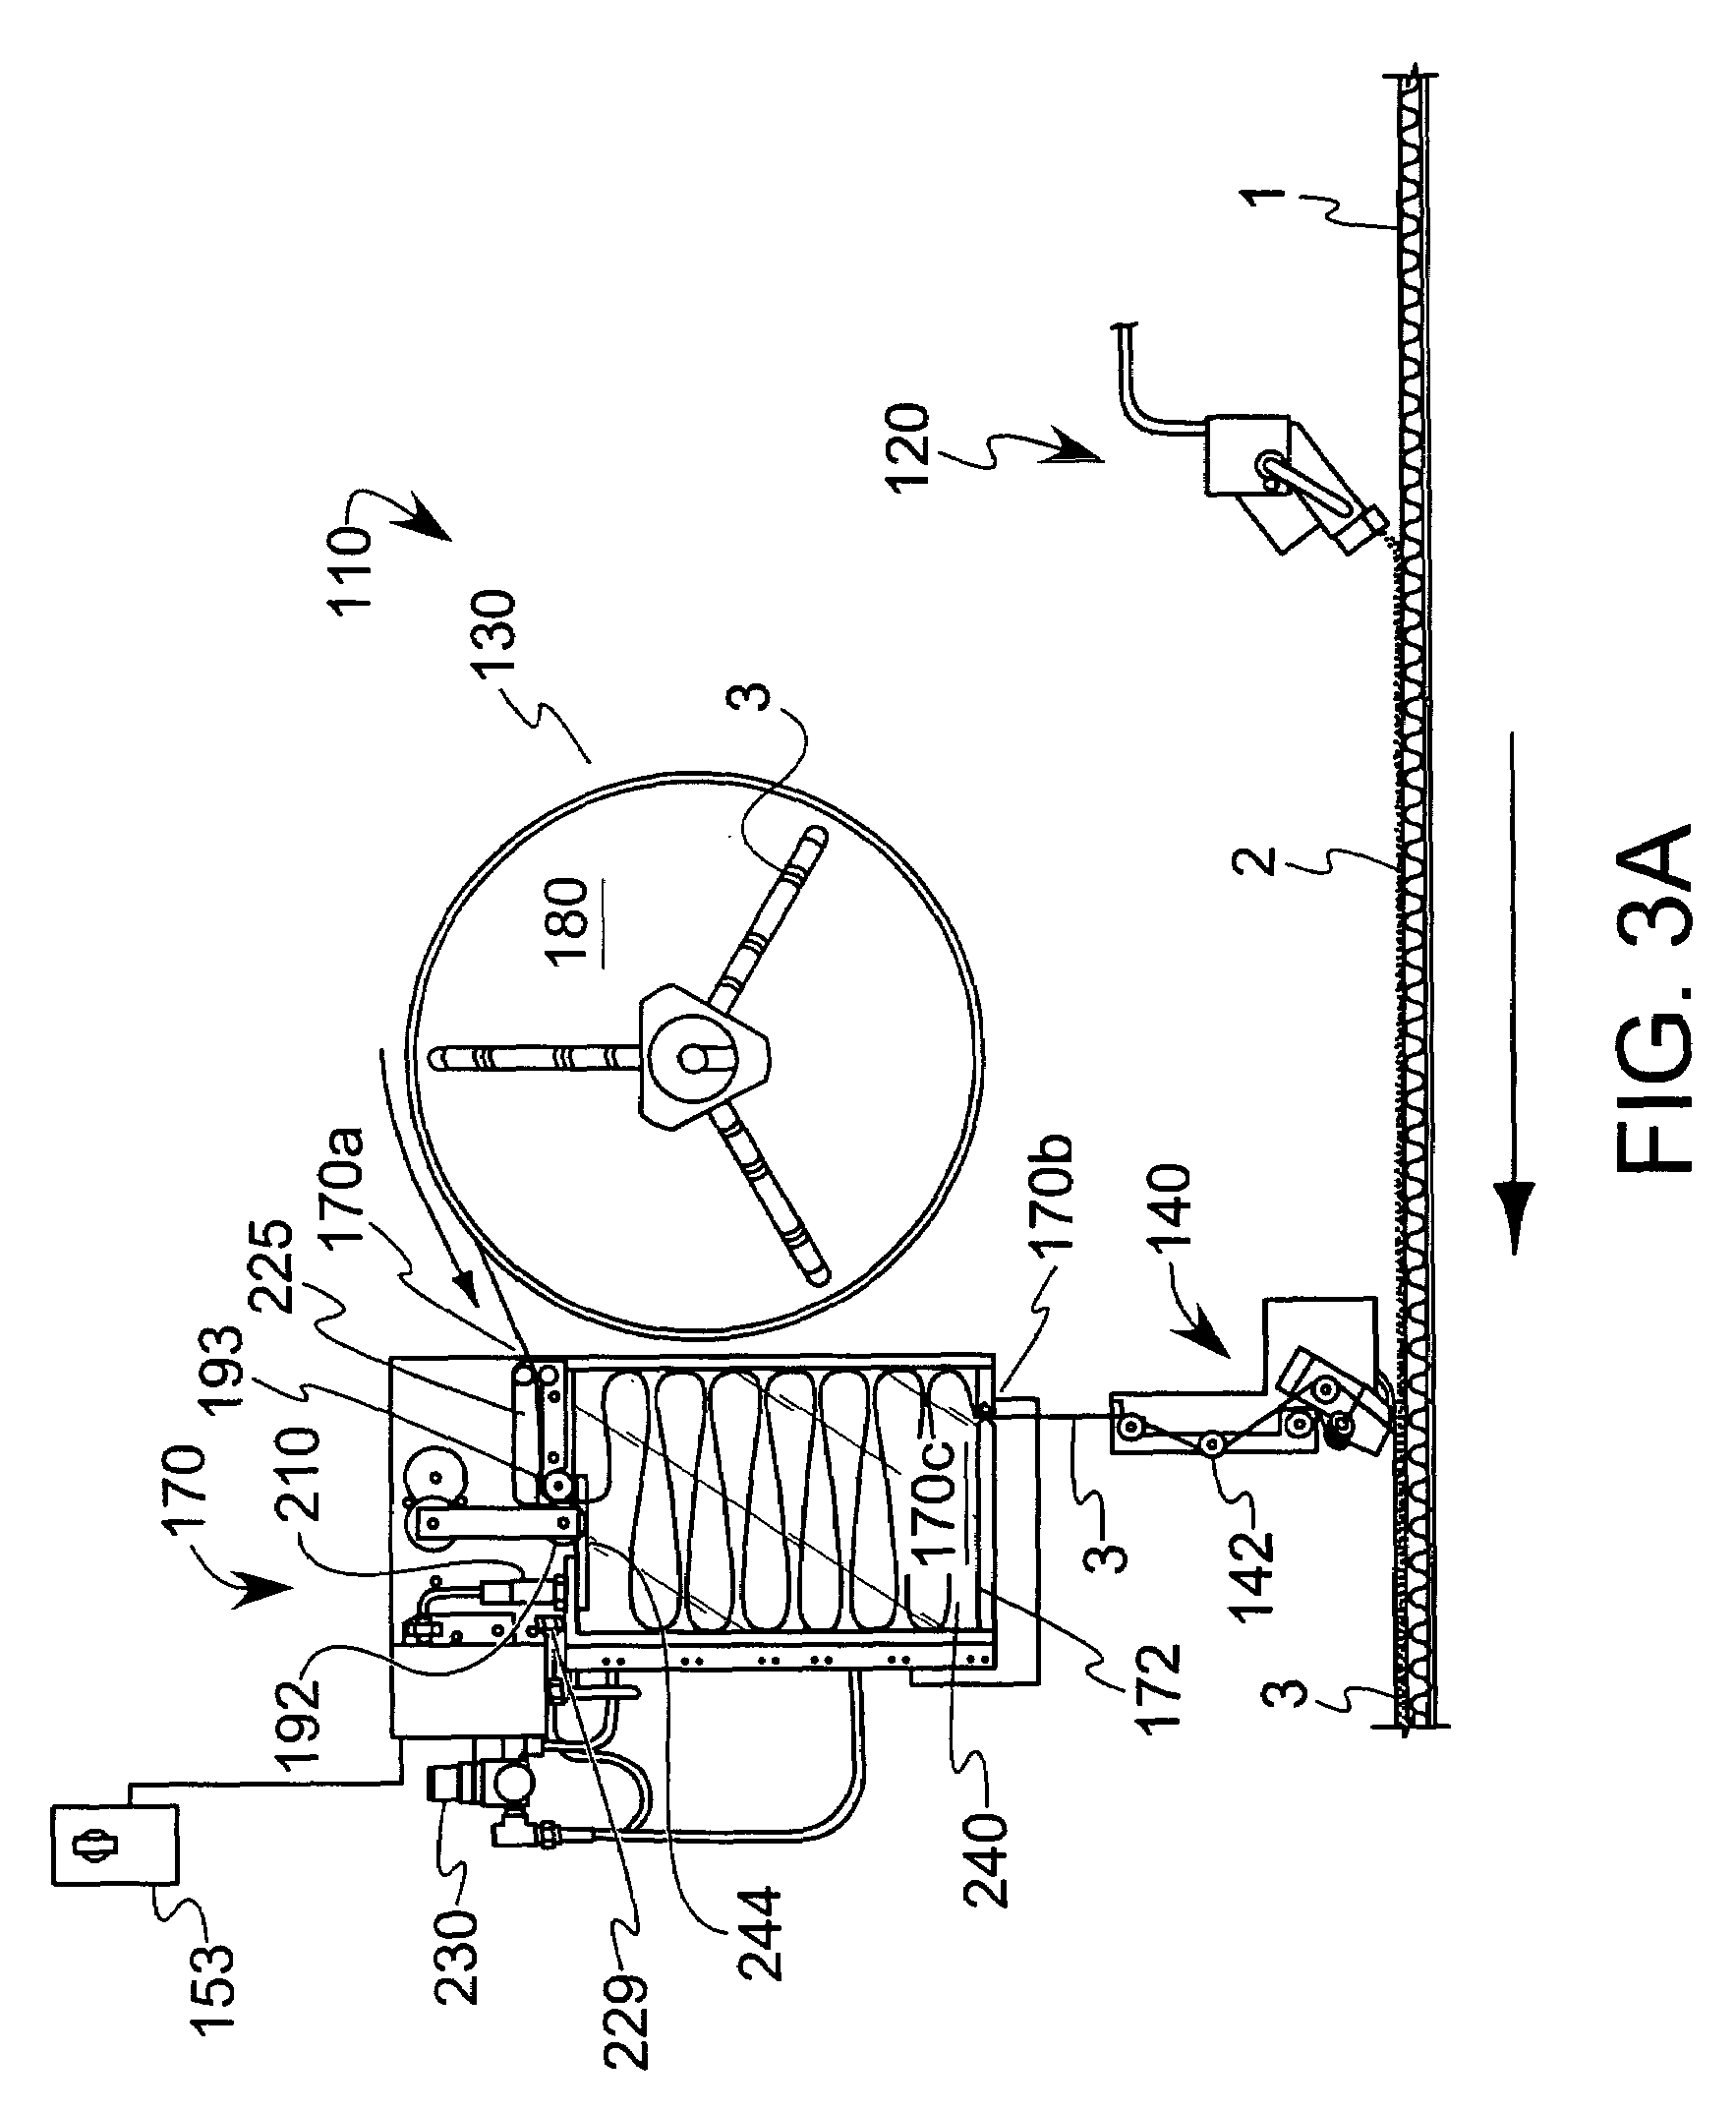 Release liner staging unit and system incorporating same